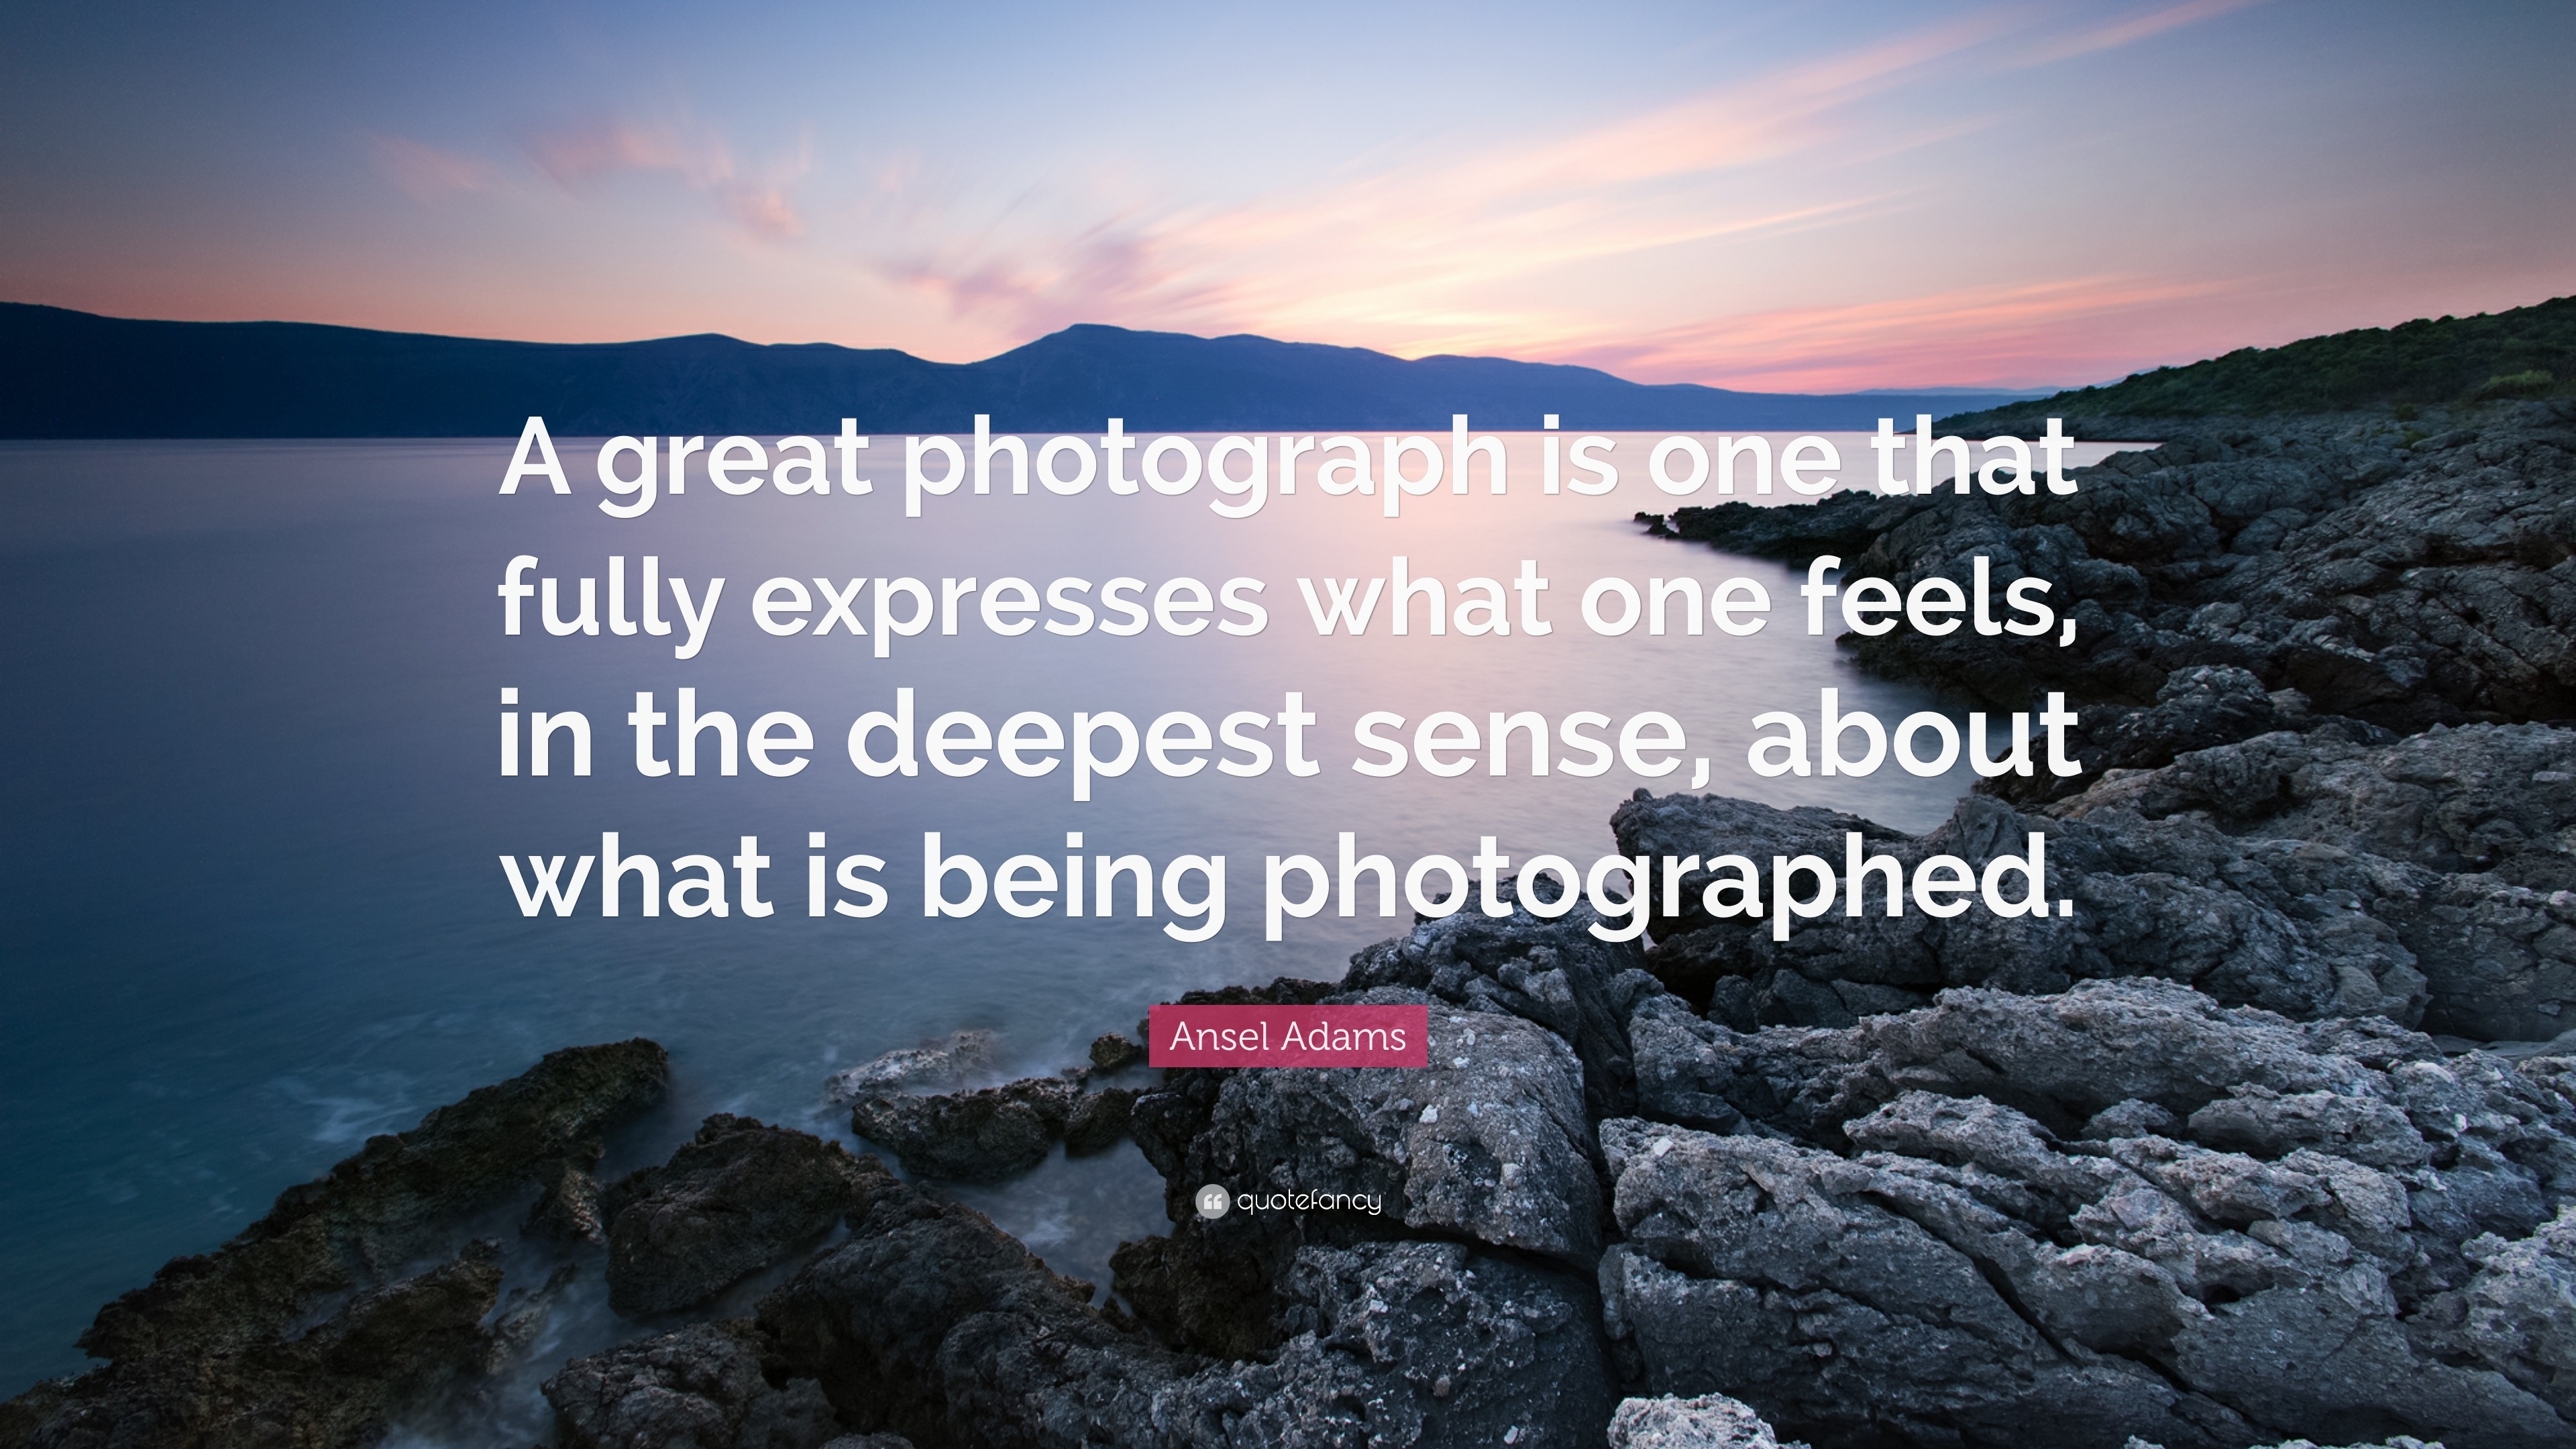 Ansel Adams Quote: “A great photograph is one that fully expresses what ...